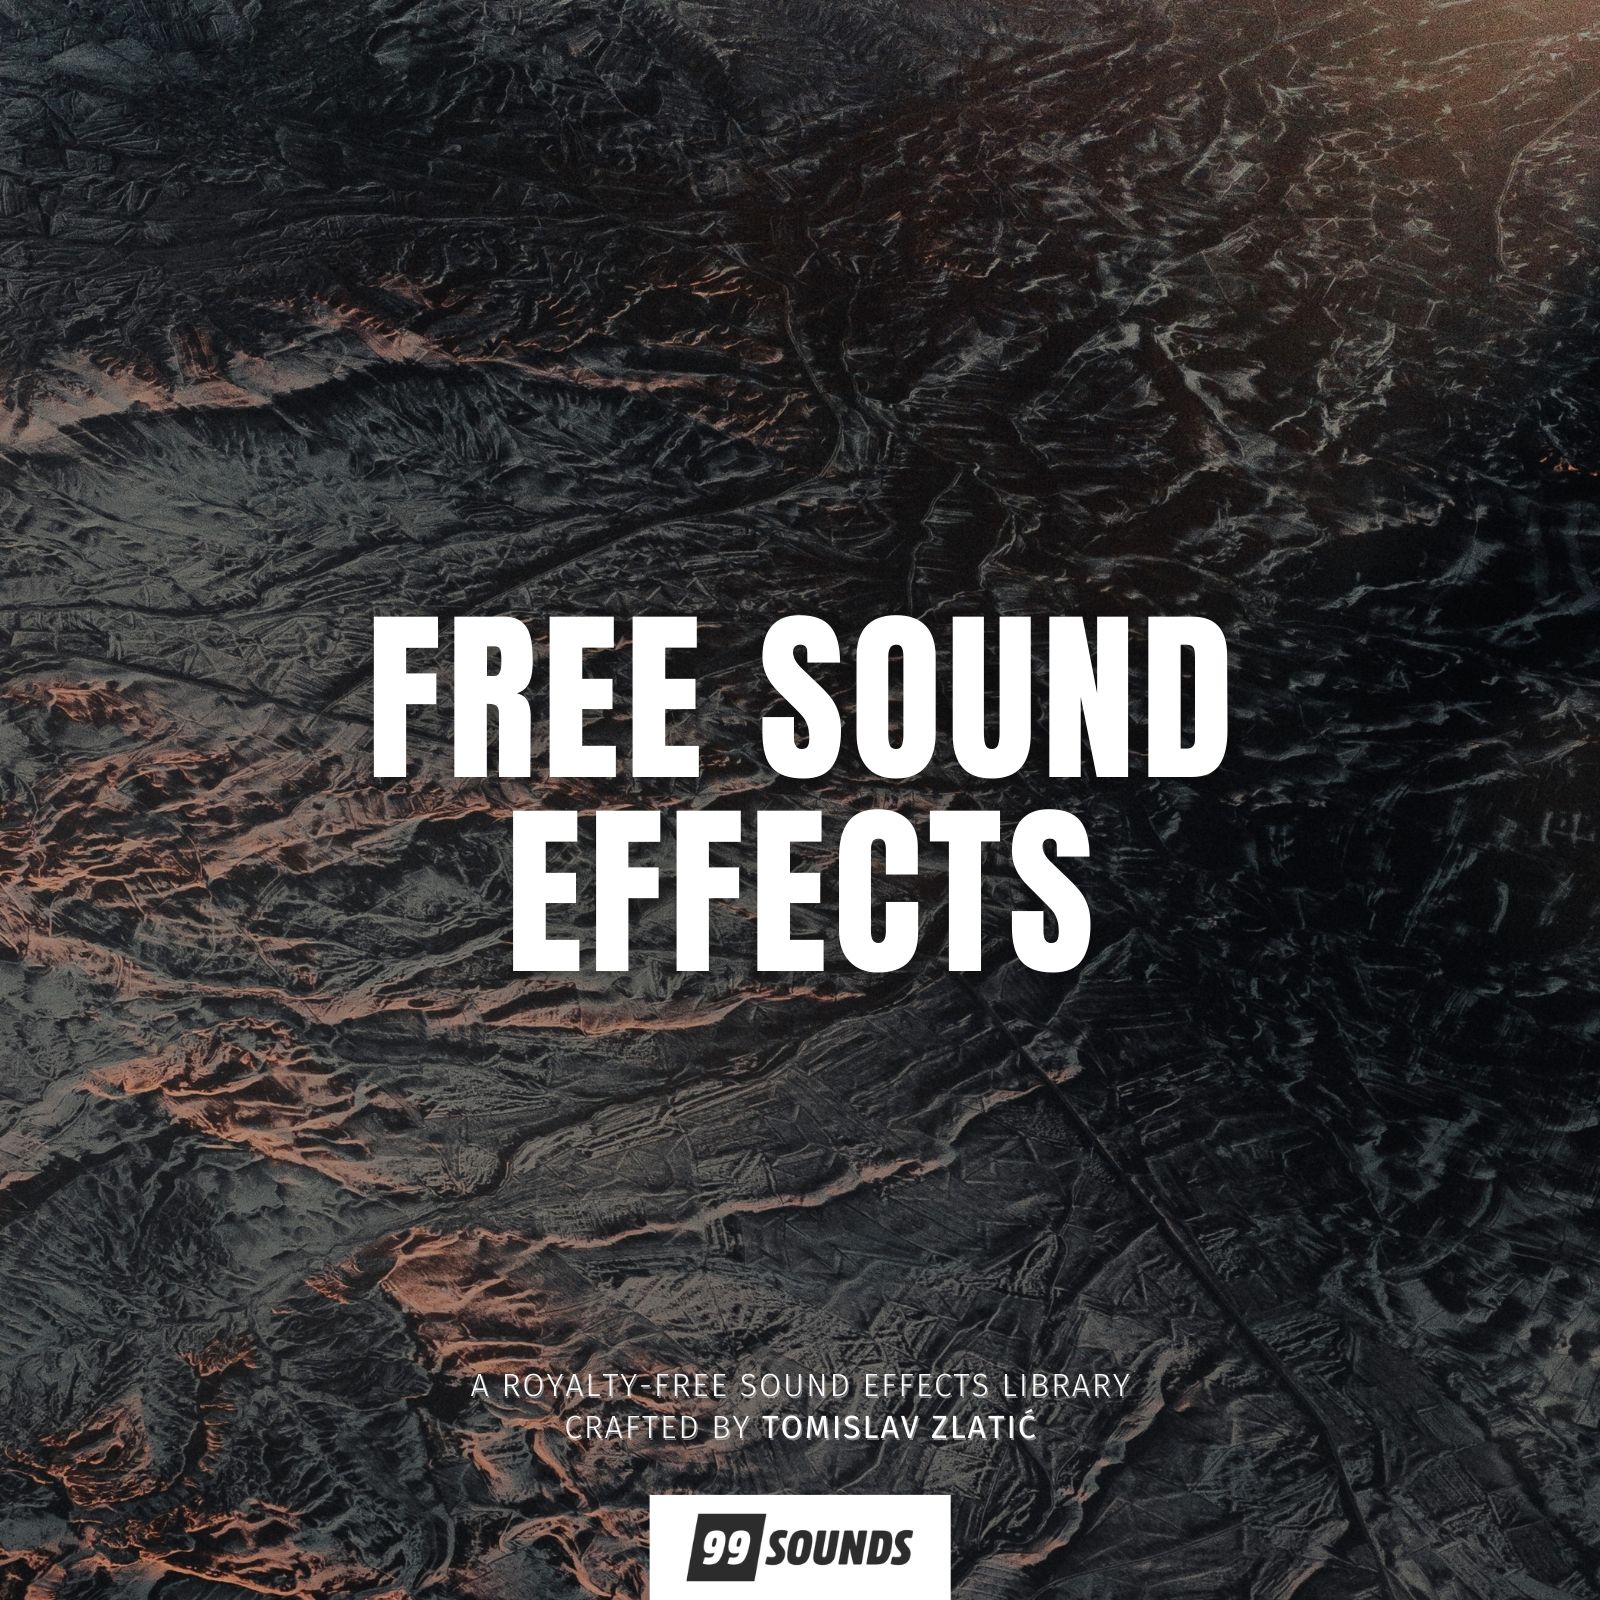 Video Game Sound Effects - Royalty Free Sound Packs